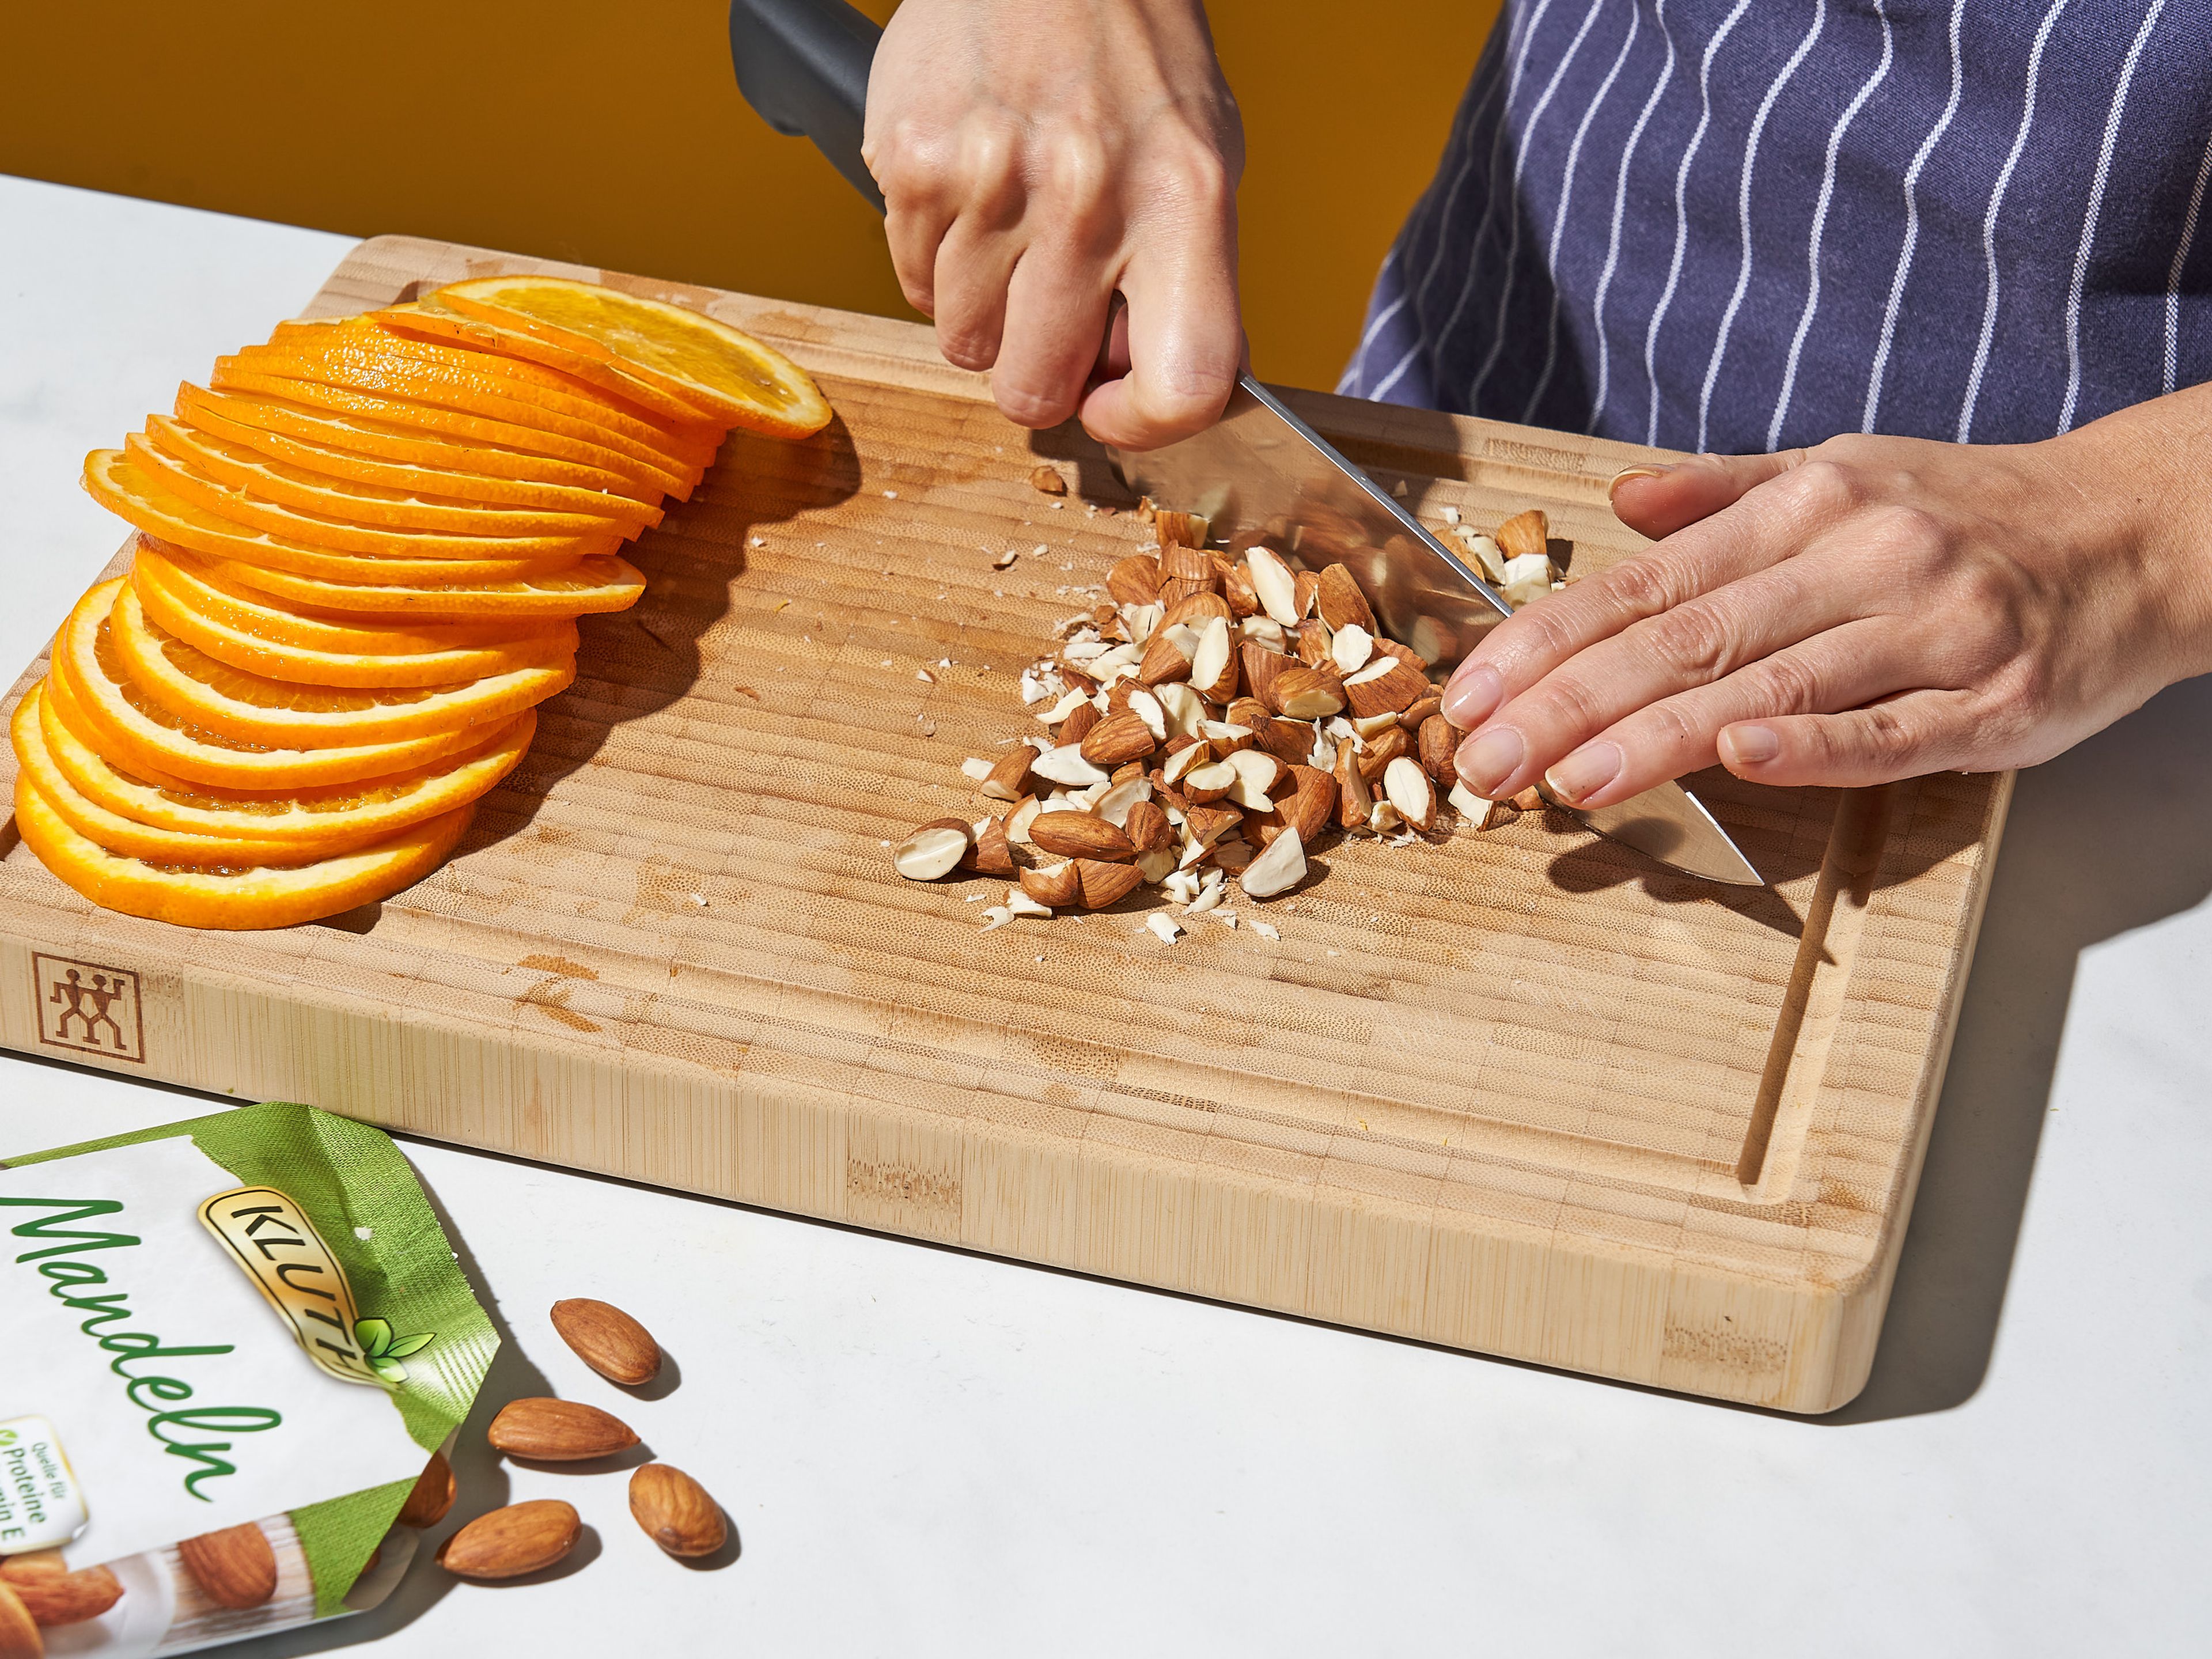 Preheat the oven to 200°C/400°F. Coat the bottom and sides of a springform pan with oil. Line the bottom of the pan with parchment paper and coat with more oil. Chop the almonds. Use a knife to slice the top and tail off of the oranges, then use a mandoline to very thinly slice the fruit (approx. 0,3 cm/ ⅛ in.). Remove and discard any seeds from the slices.